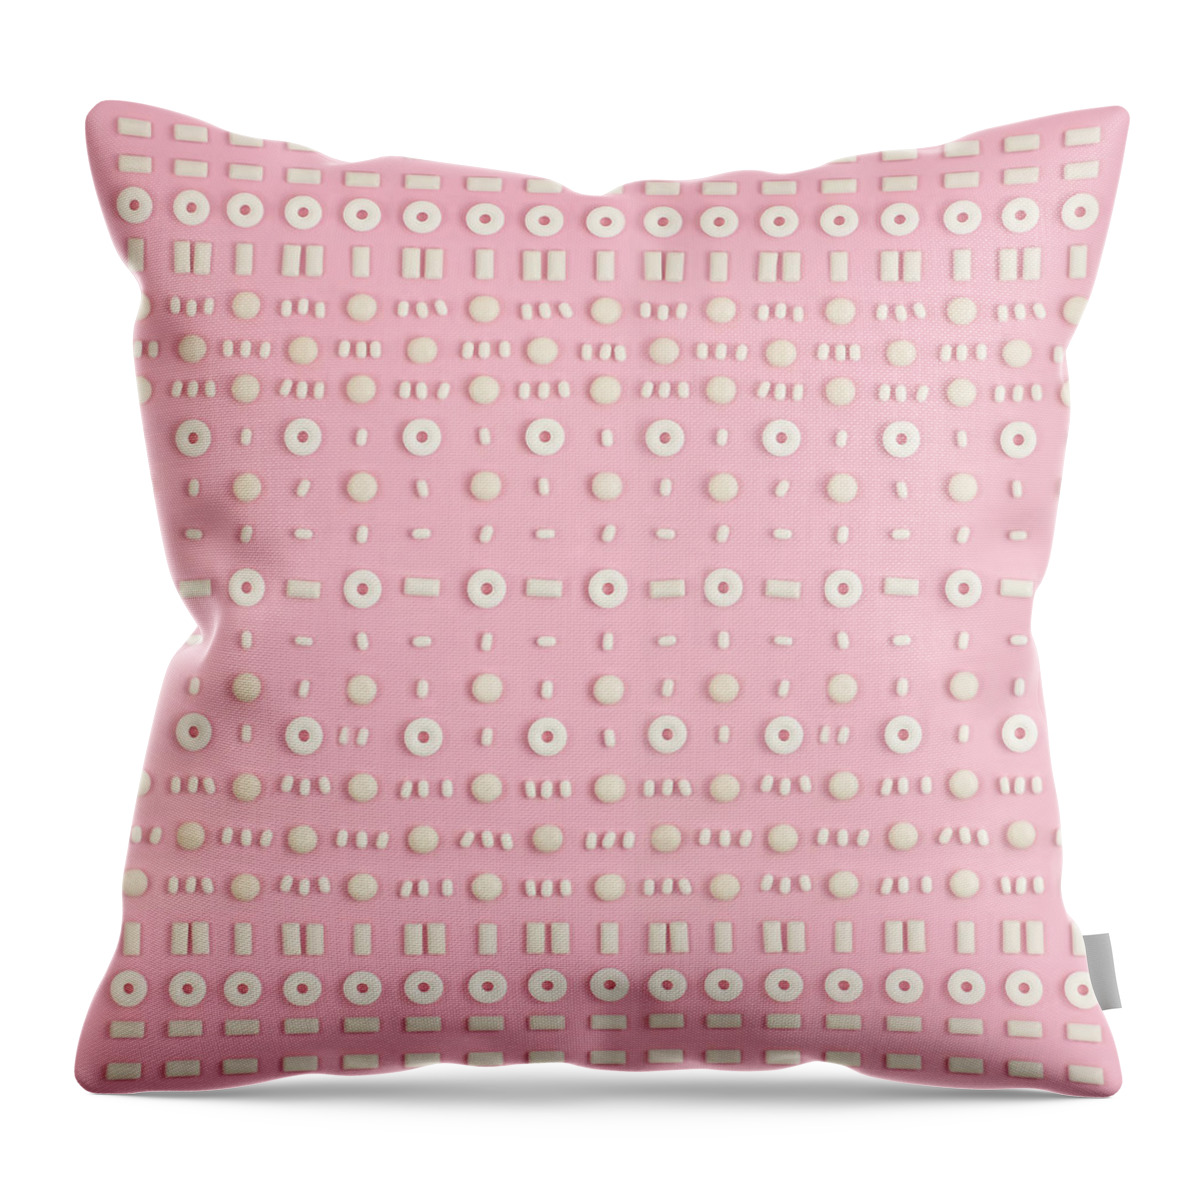 In A Row Throw Pillow featuring the photograph White Candies Arranged In A Pattern by Juj Winn